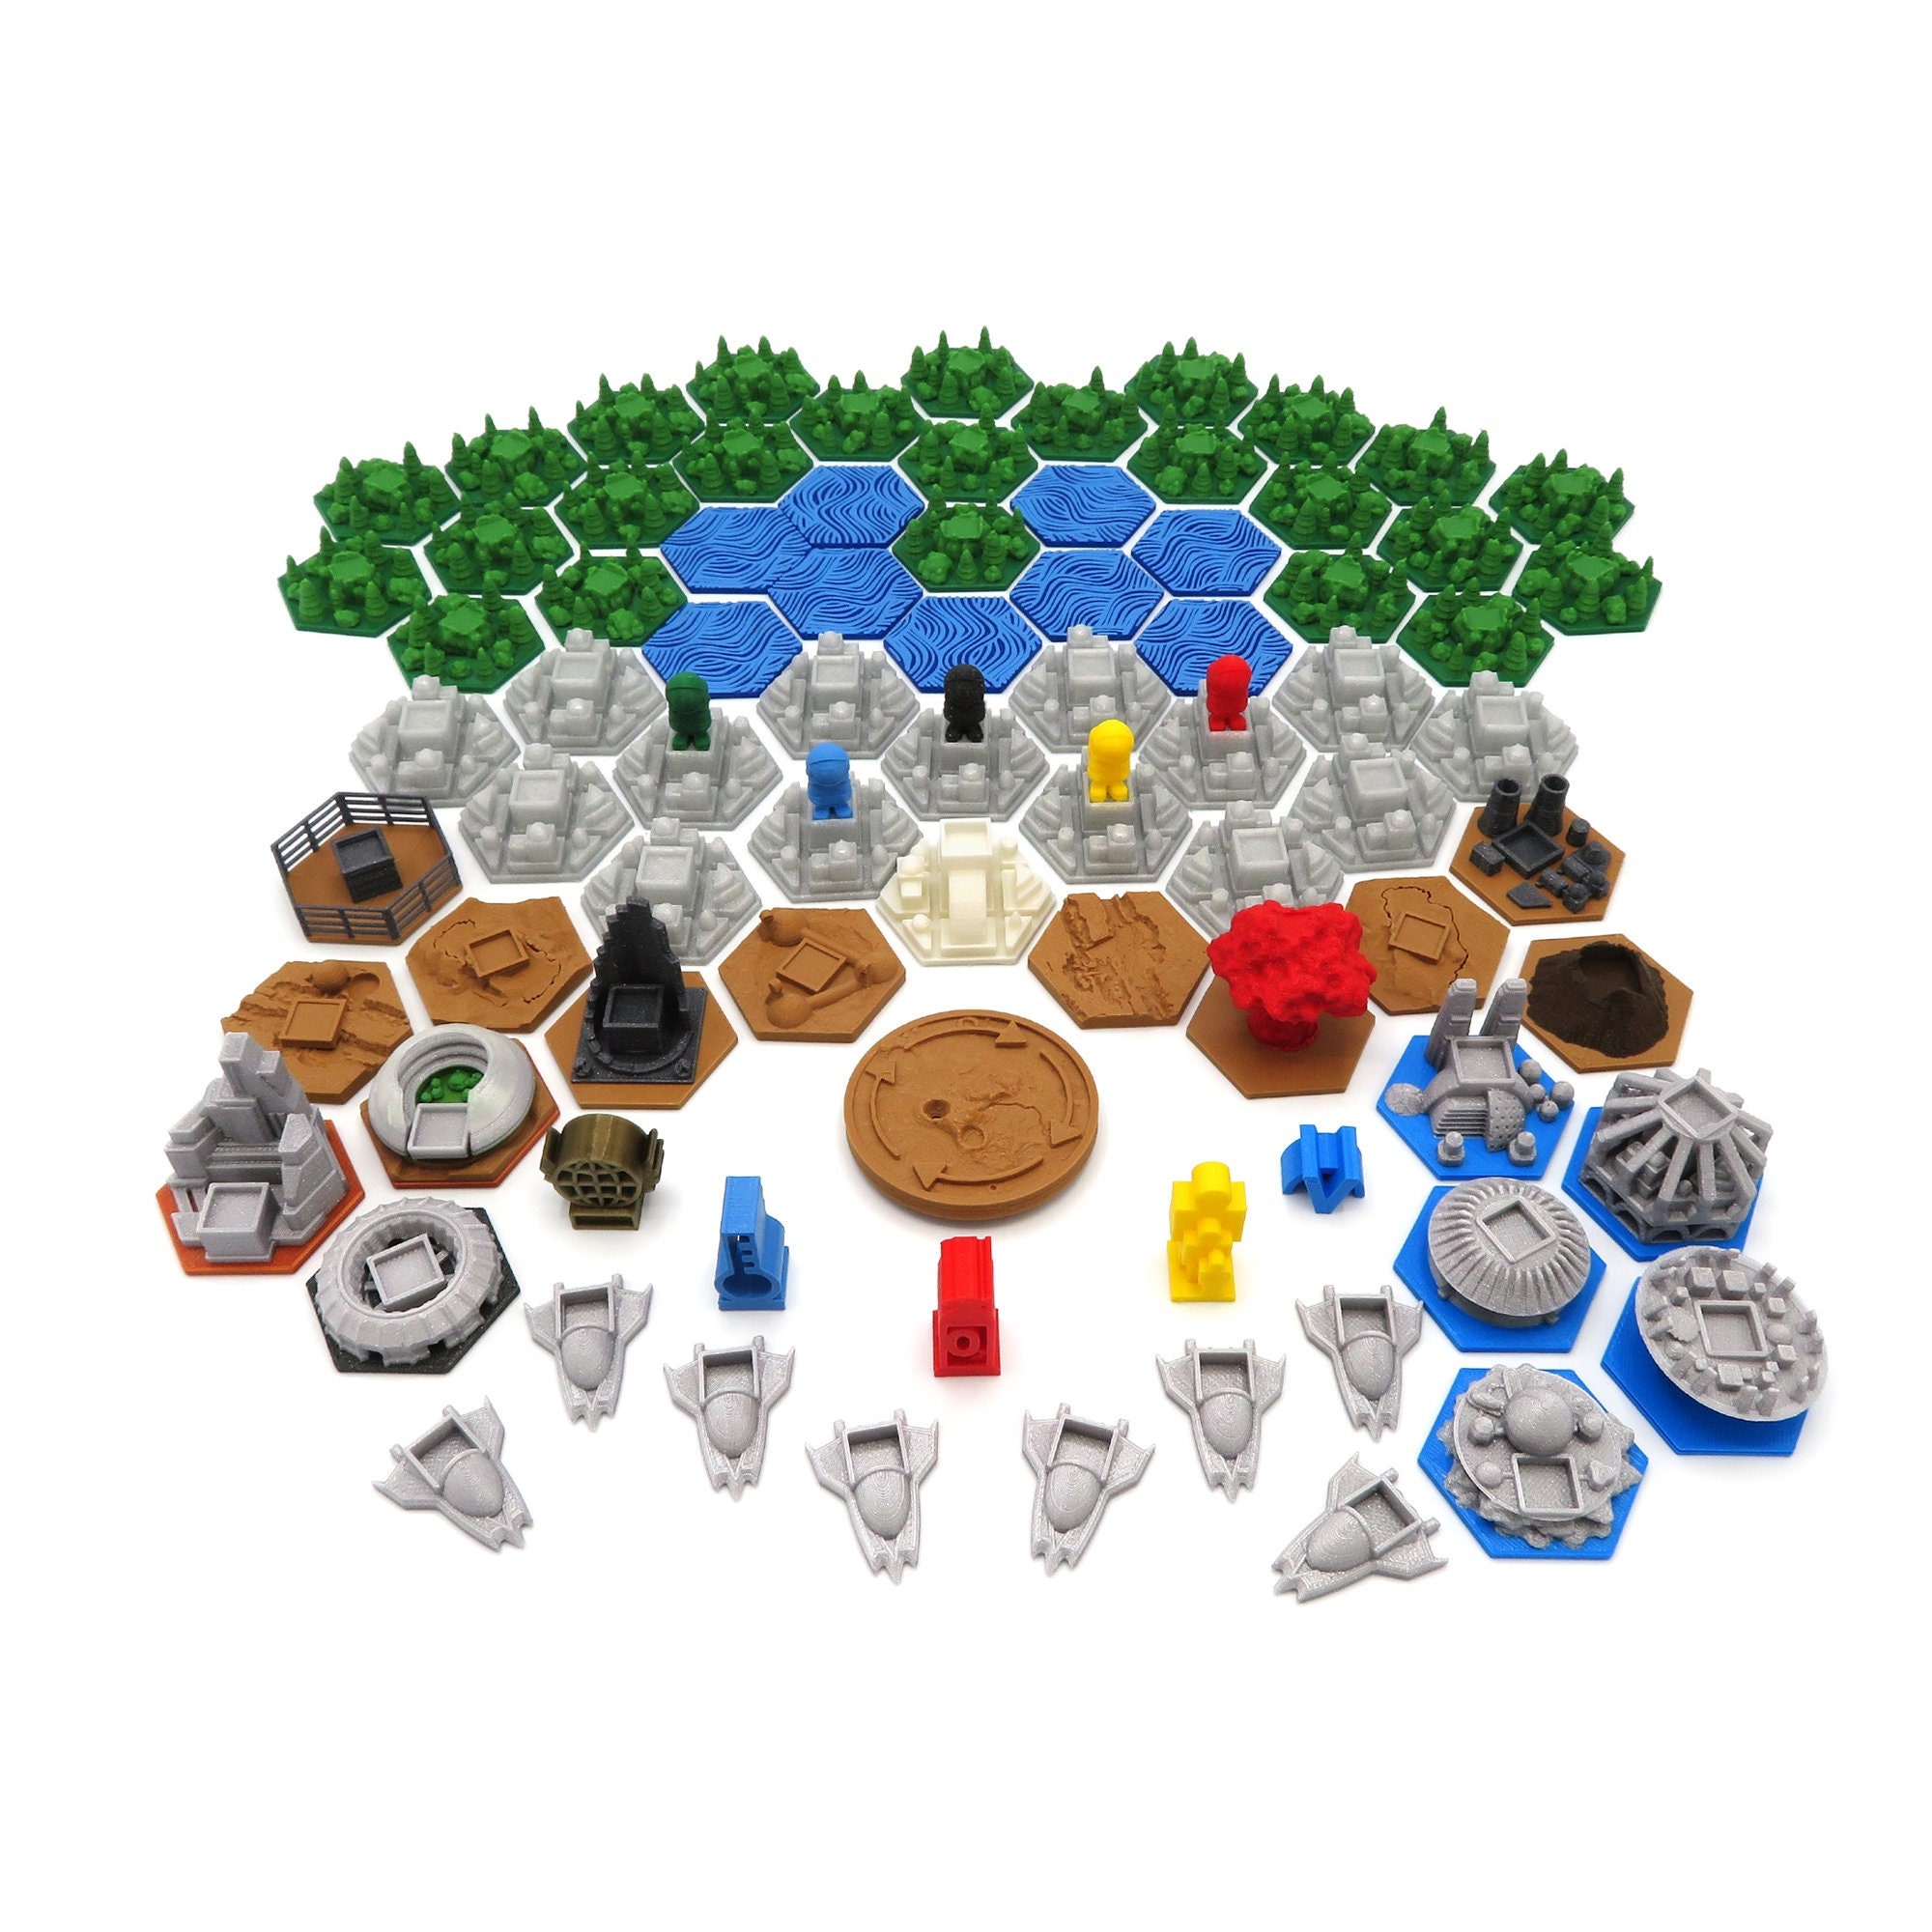 Terraforming Mars. The materials we would need to…